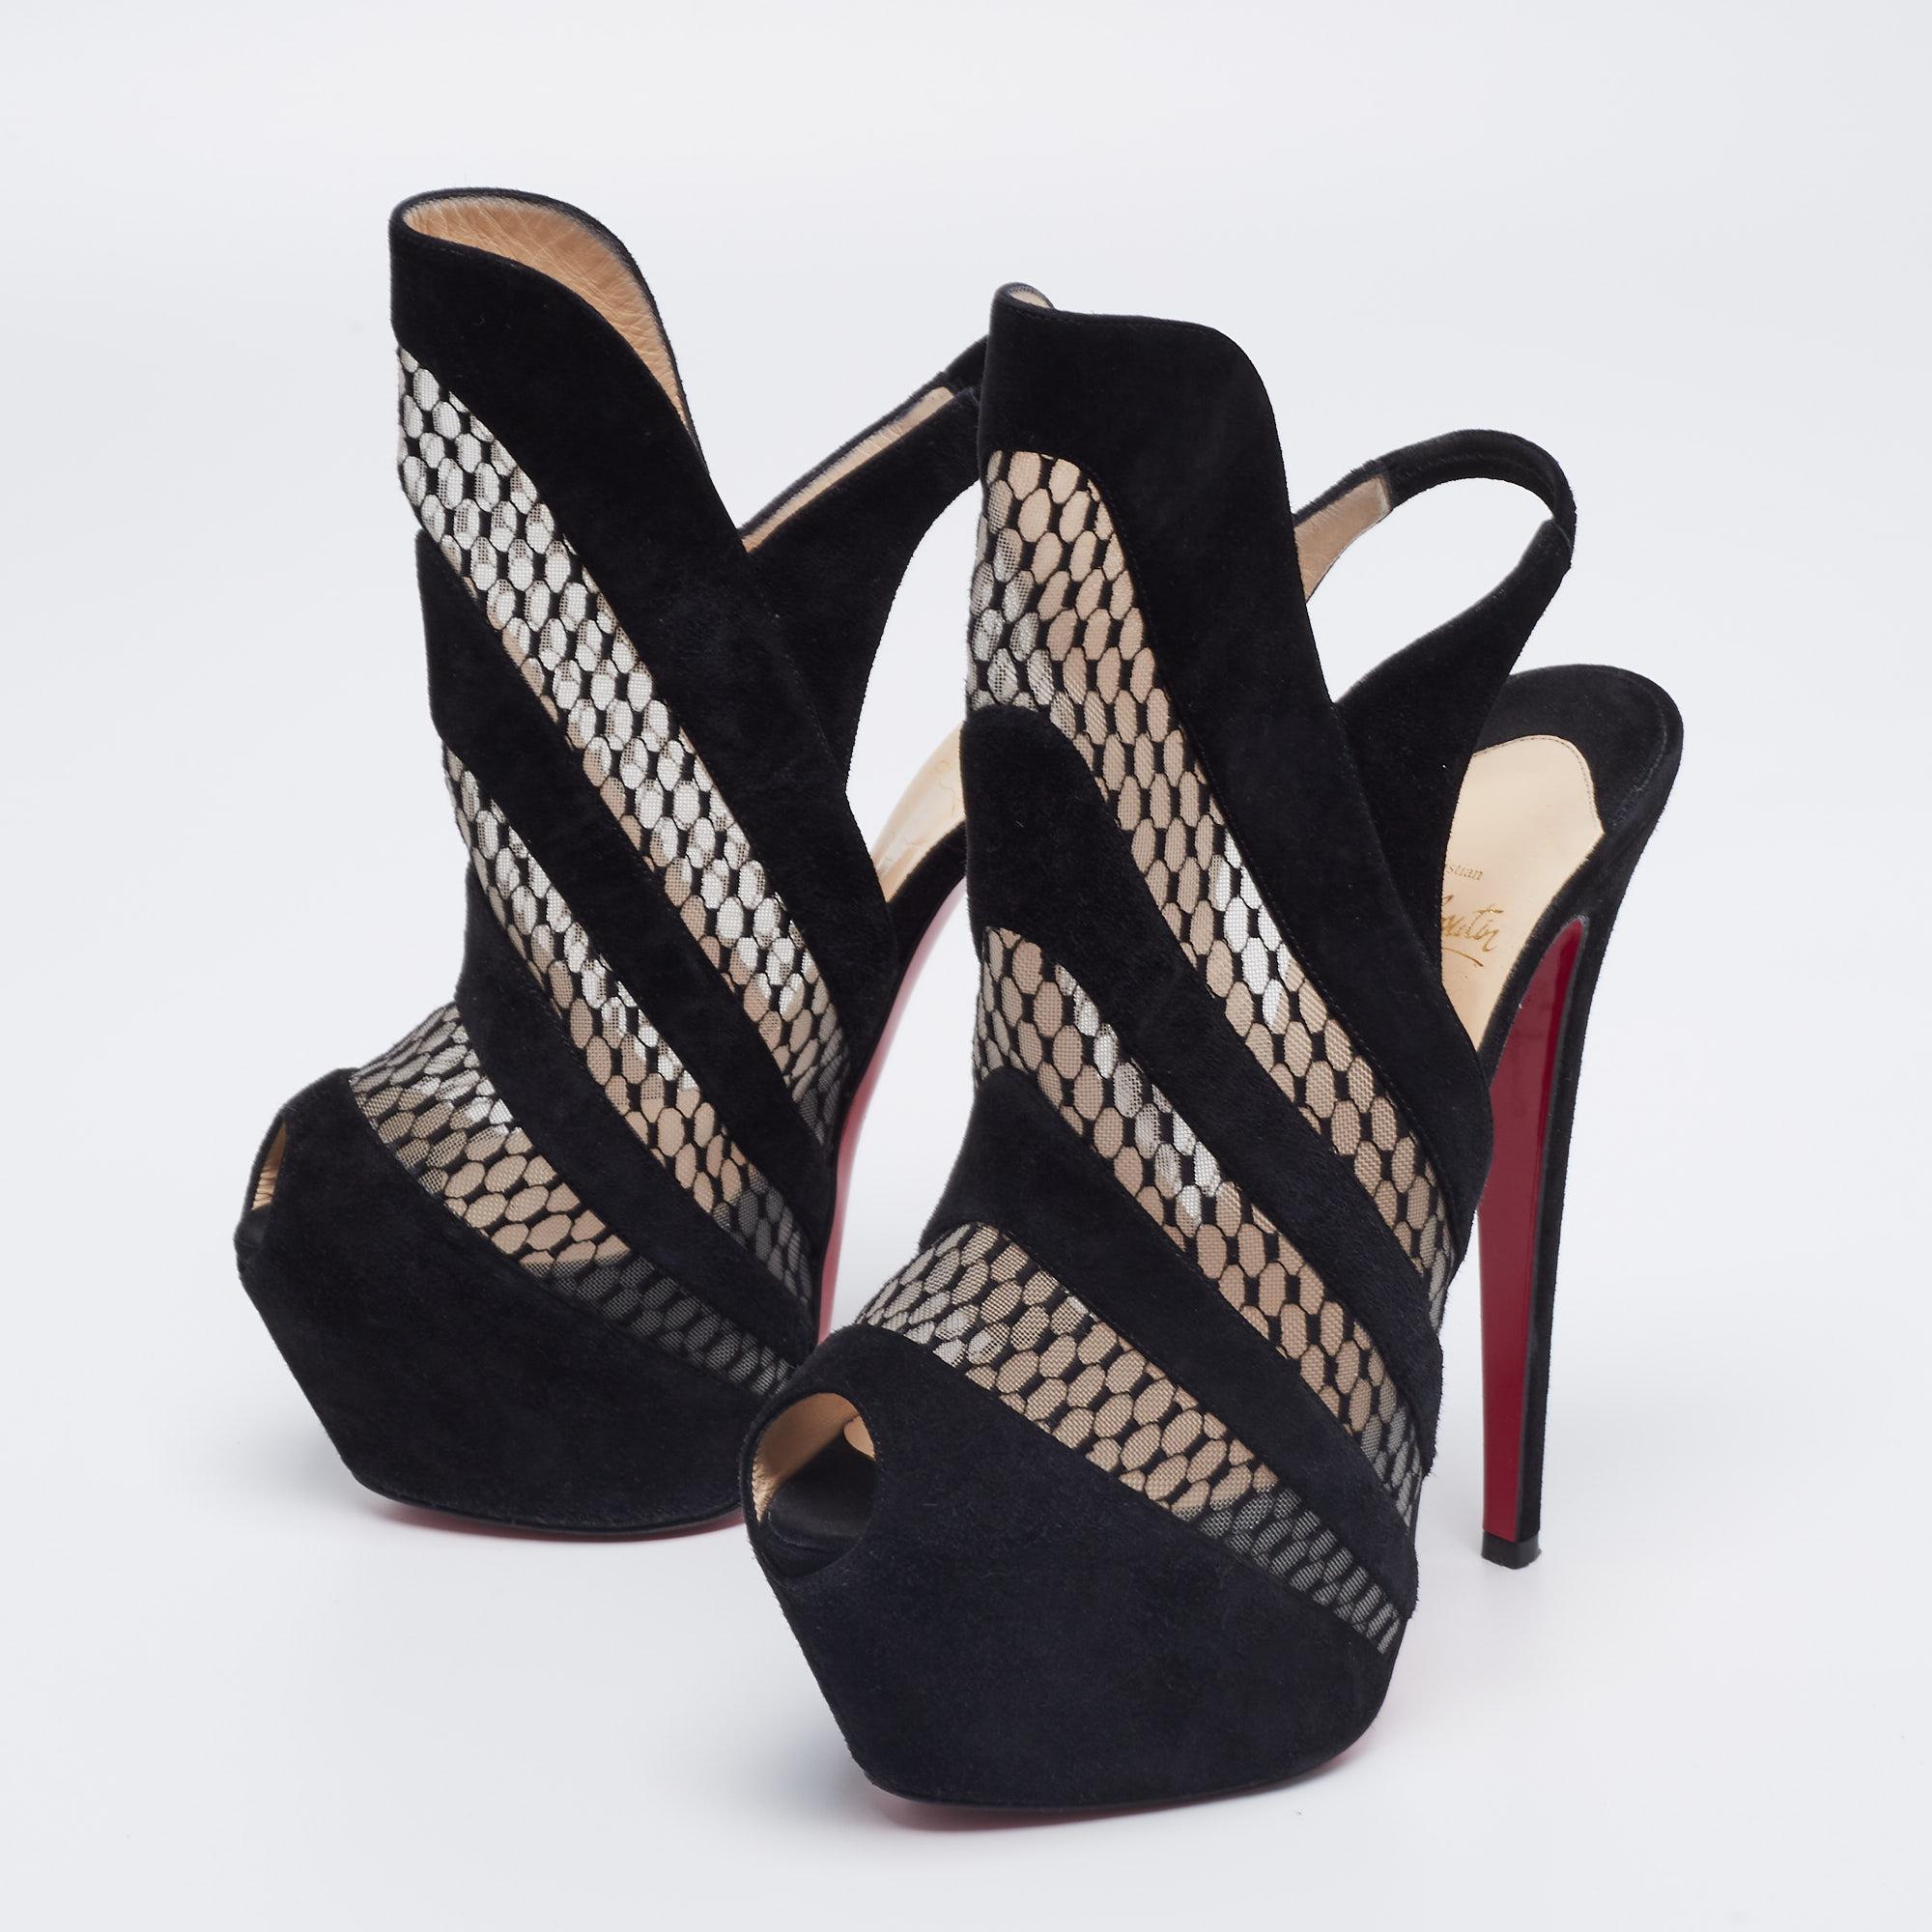 Women's Christian Louboutin Black Suede and Mesh Guizi Platform Ankle Booties Size 38